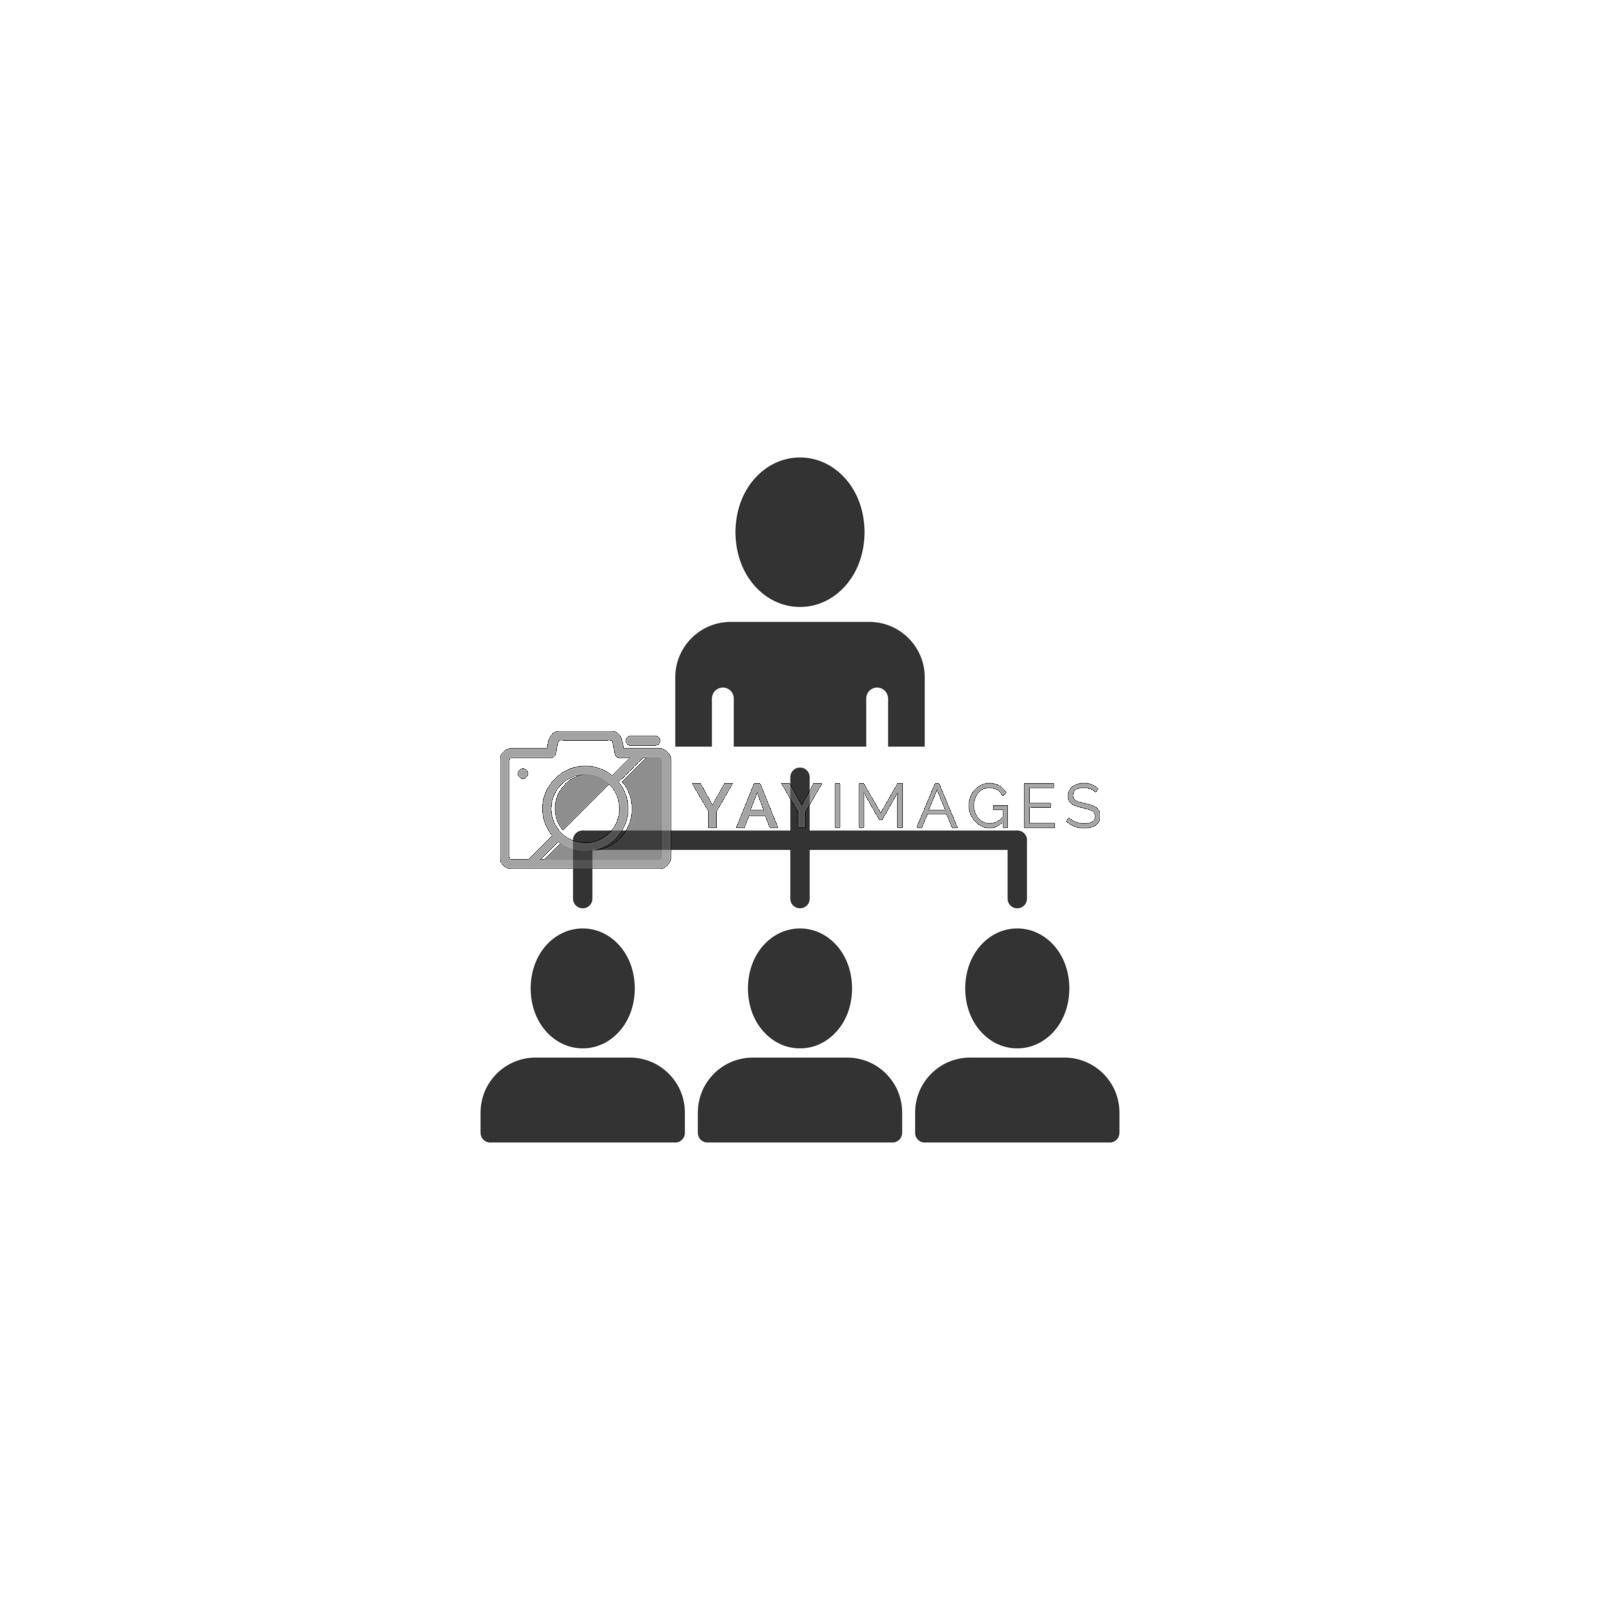 Royalty free image of Corporate organization chart with business people vector icon in flat style. People cooperation illustration on white background. Teamwork business concept. by LysenkoA